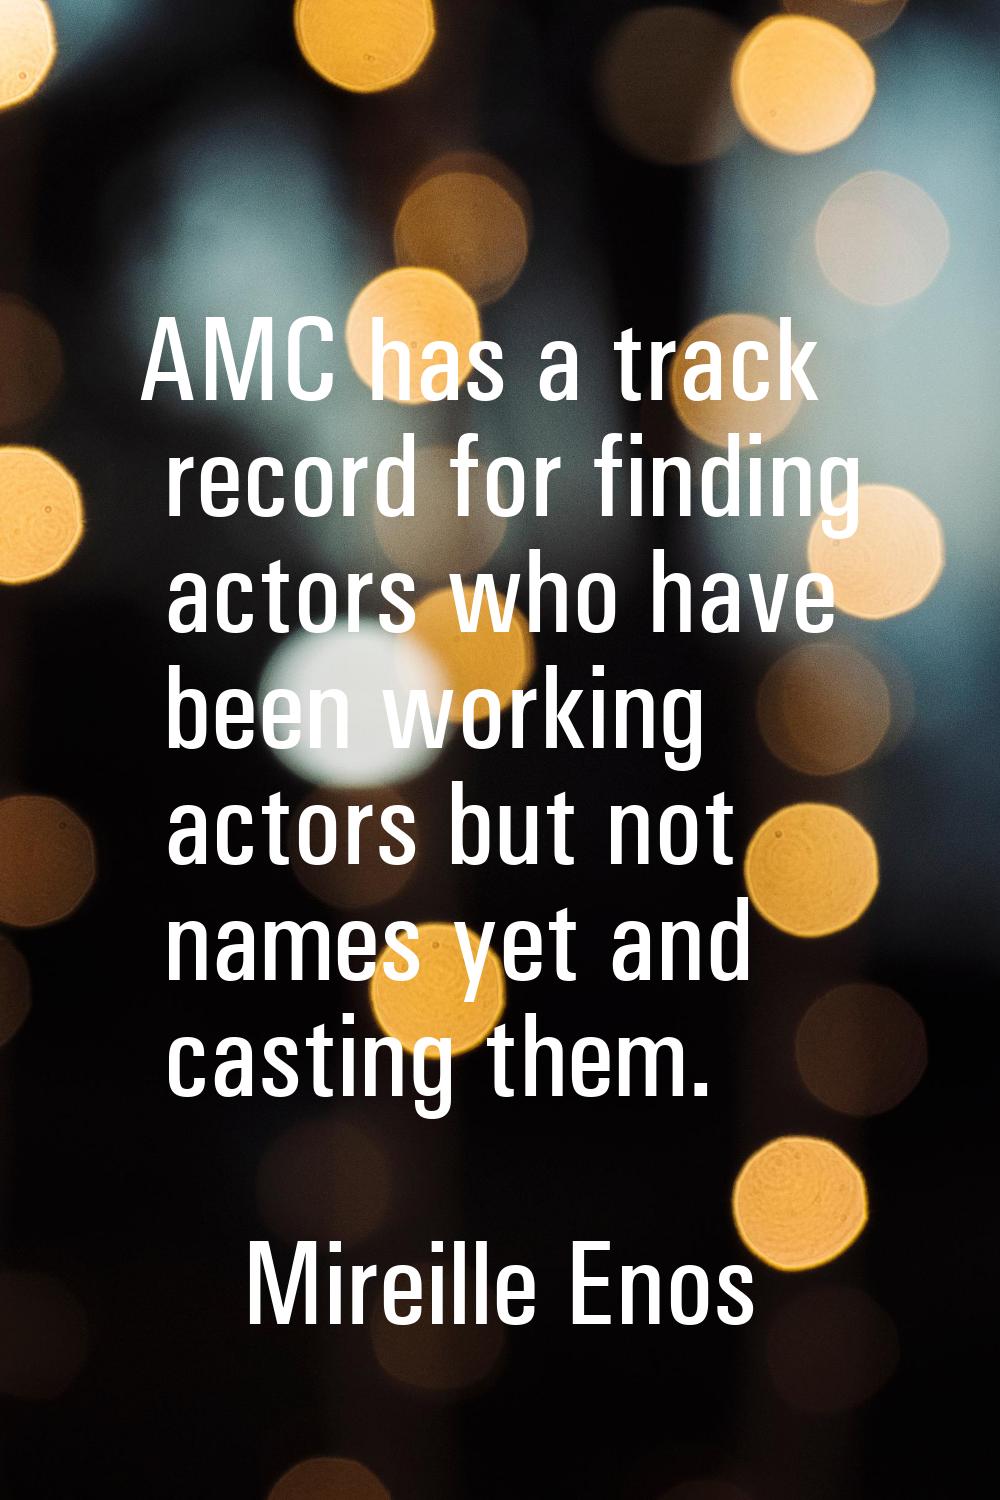 AMC has a track record for finding actors who have been working actors but not names yet and castin